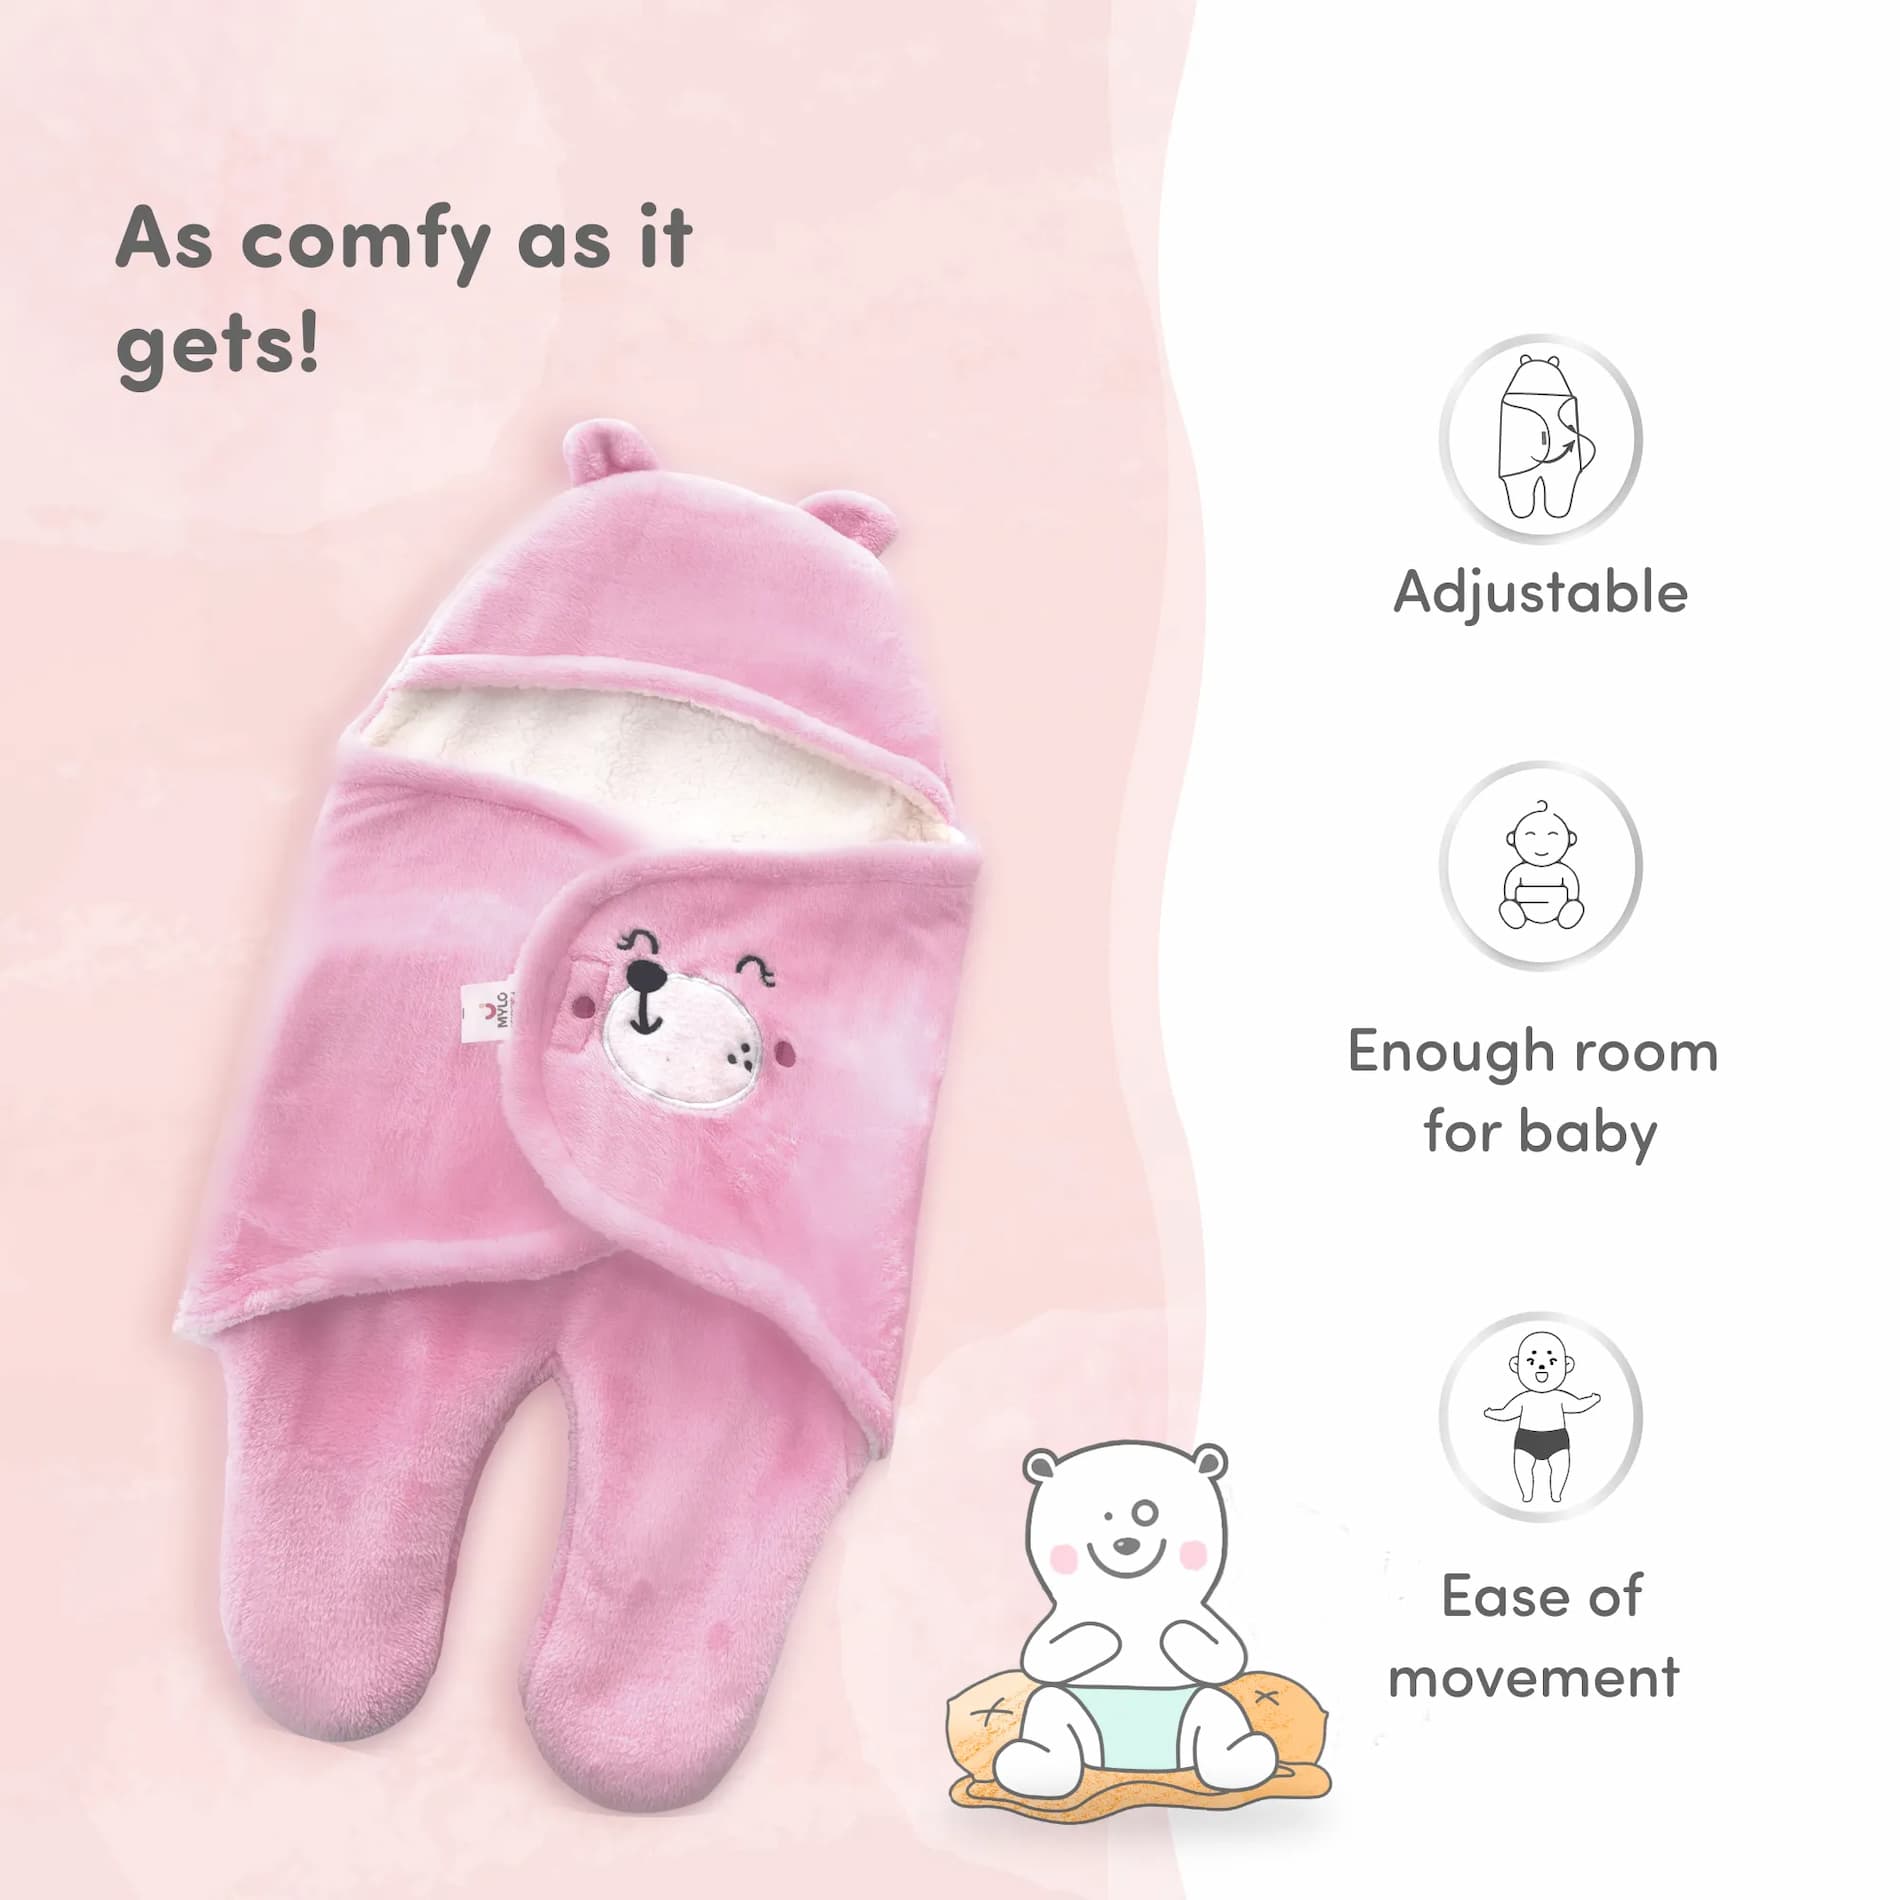 Baby Wrapper for New Born | Baby Swaddling Wrapper | 4-in-1 All Season AC Blanket cum Sleeping Bag for Baby 0-6 Months - Light Pink & Mint Green